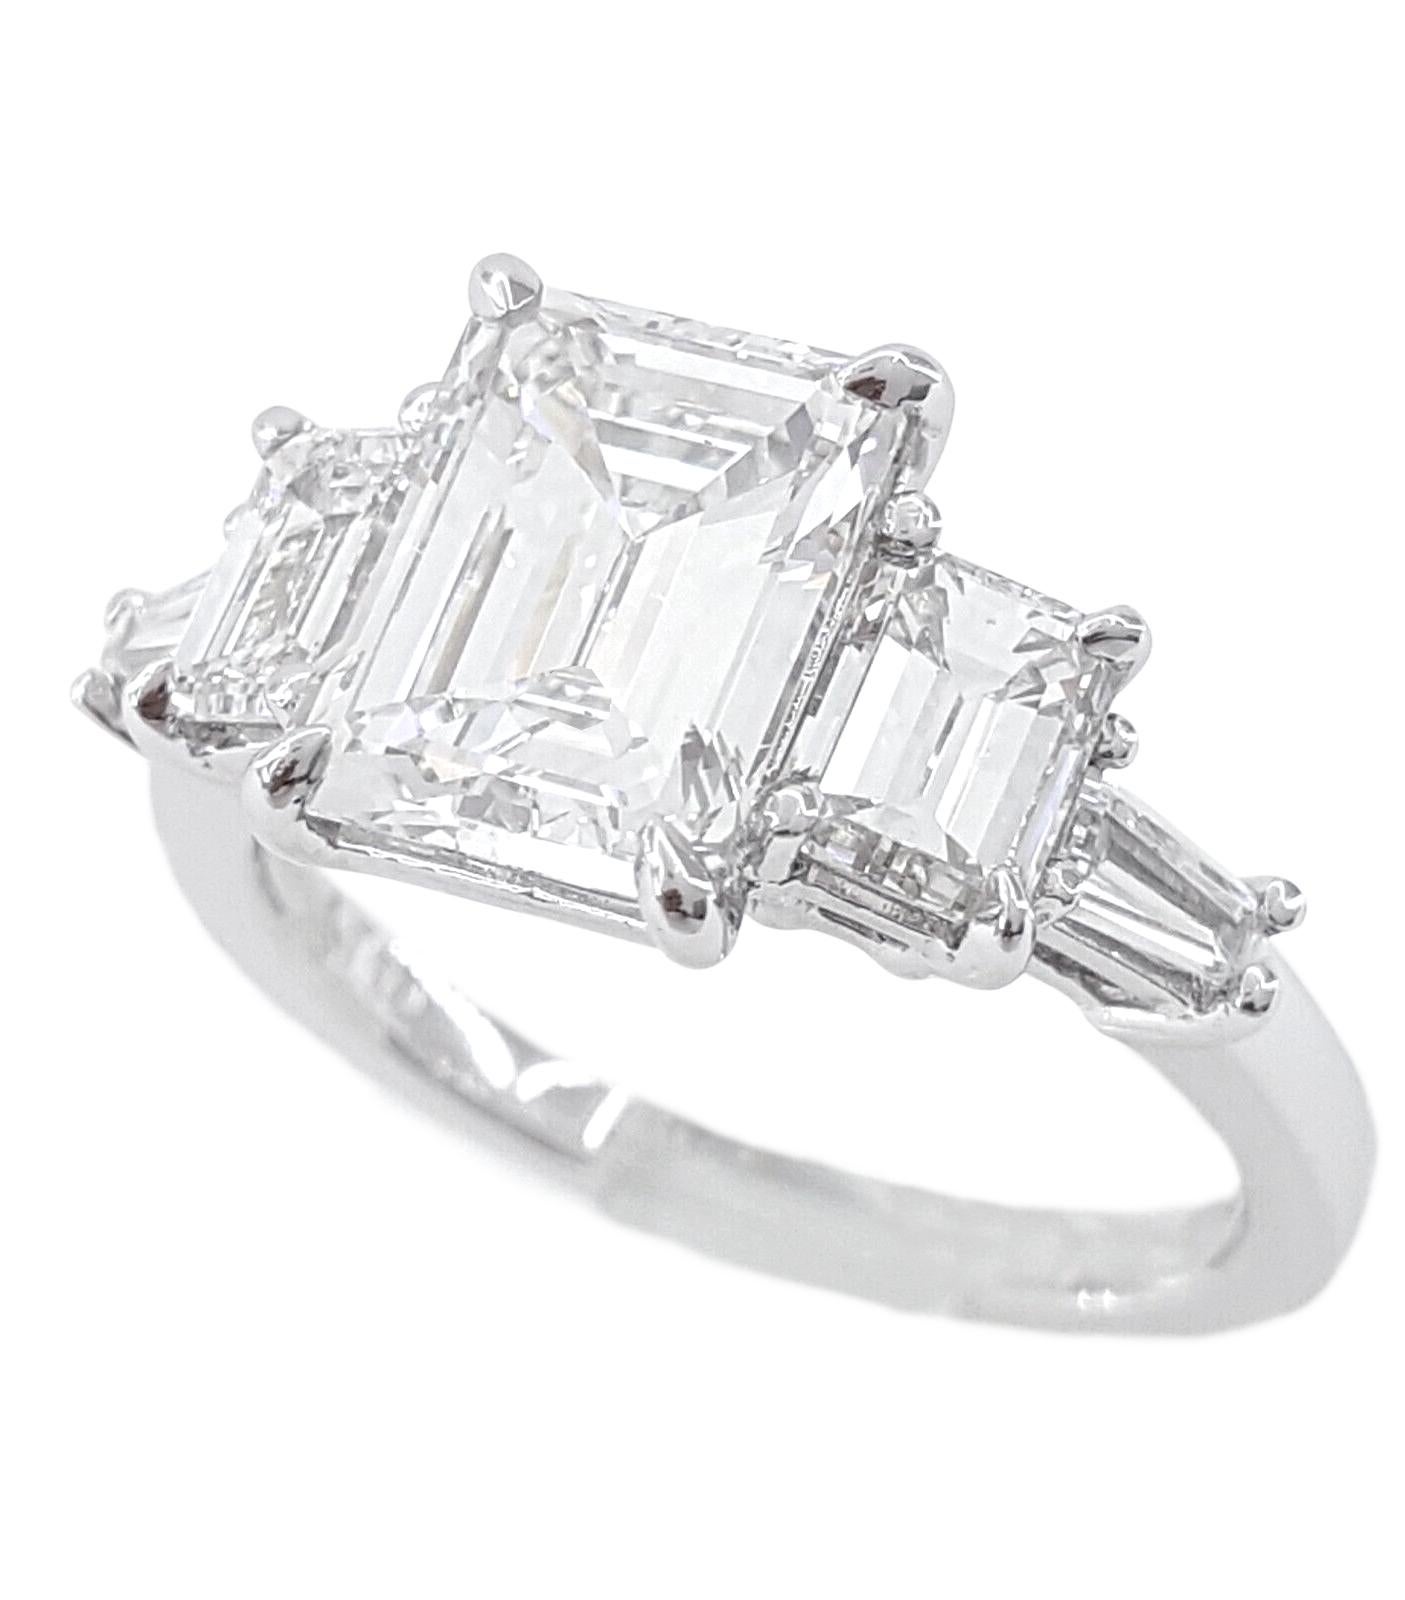 Introducing the elegant GIA Certified 4 Carat Emerald Cut Diamond Three Stone 18K White Gold Ring, a timeless symbol of sophistication and luxury. This exquisite ring features three stunning emerald-cut diamonds, each certified by the renowned